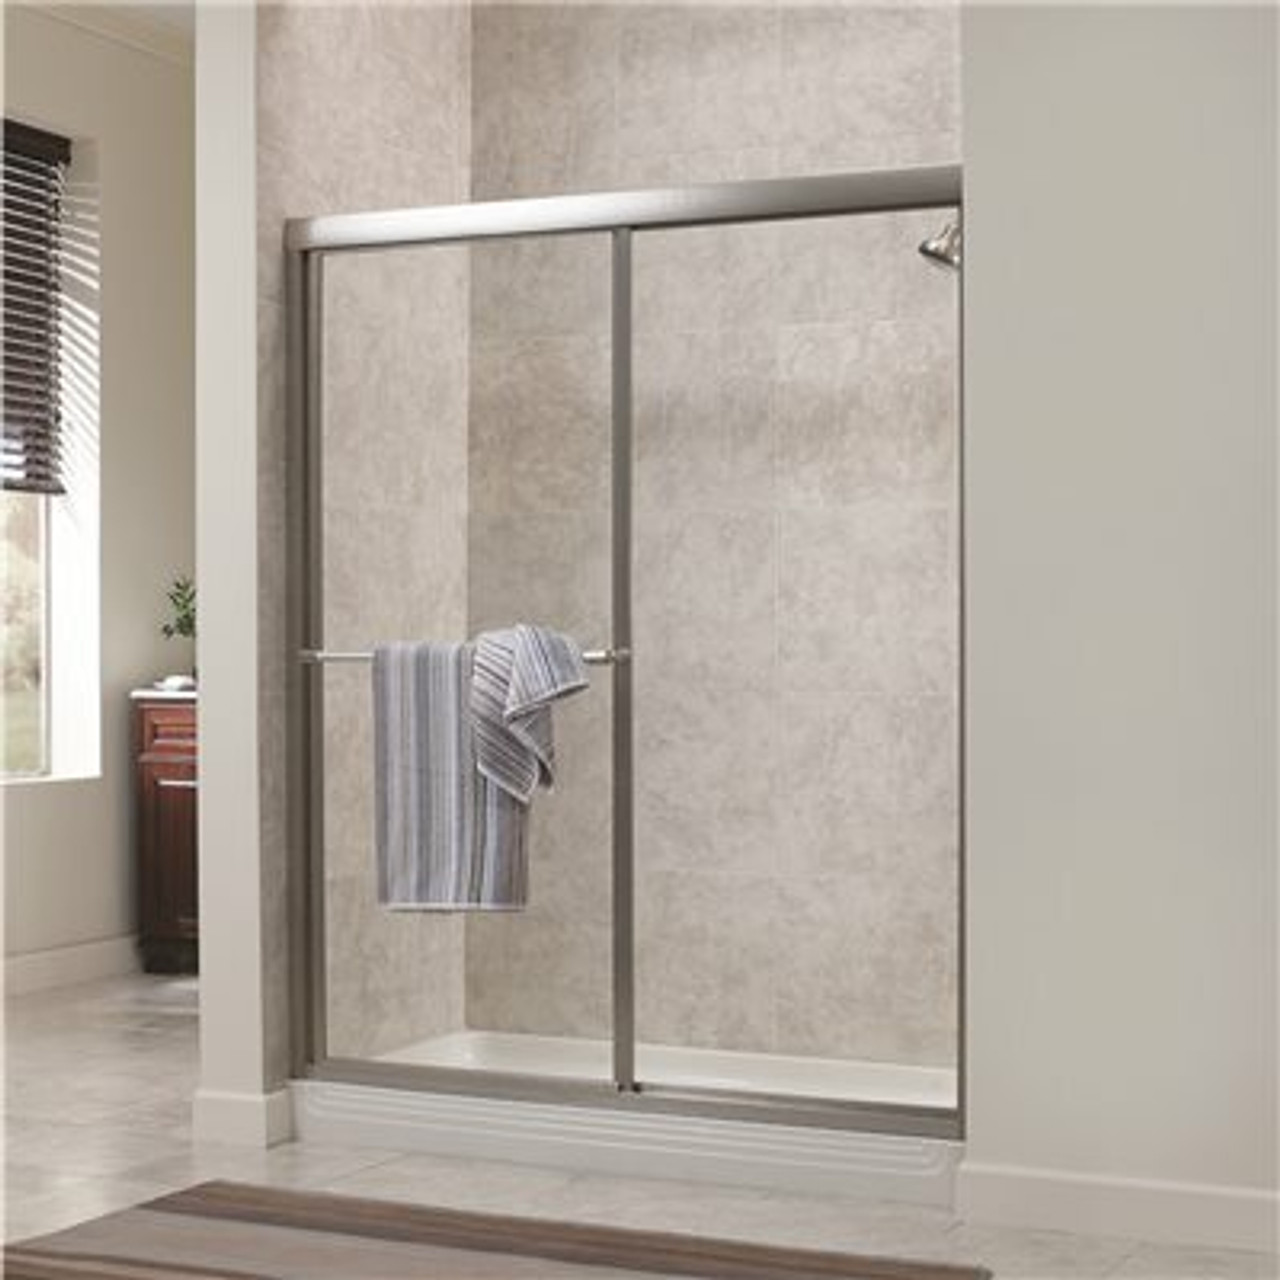 Foremost Tides 56 In. To 60 In. X 70 In. H Framed Sliding Shower Door In Brushed Nickel And Rain Glass